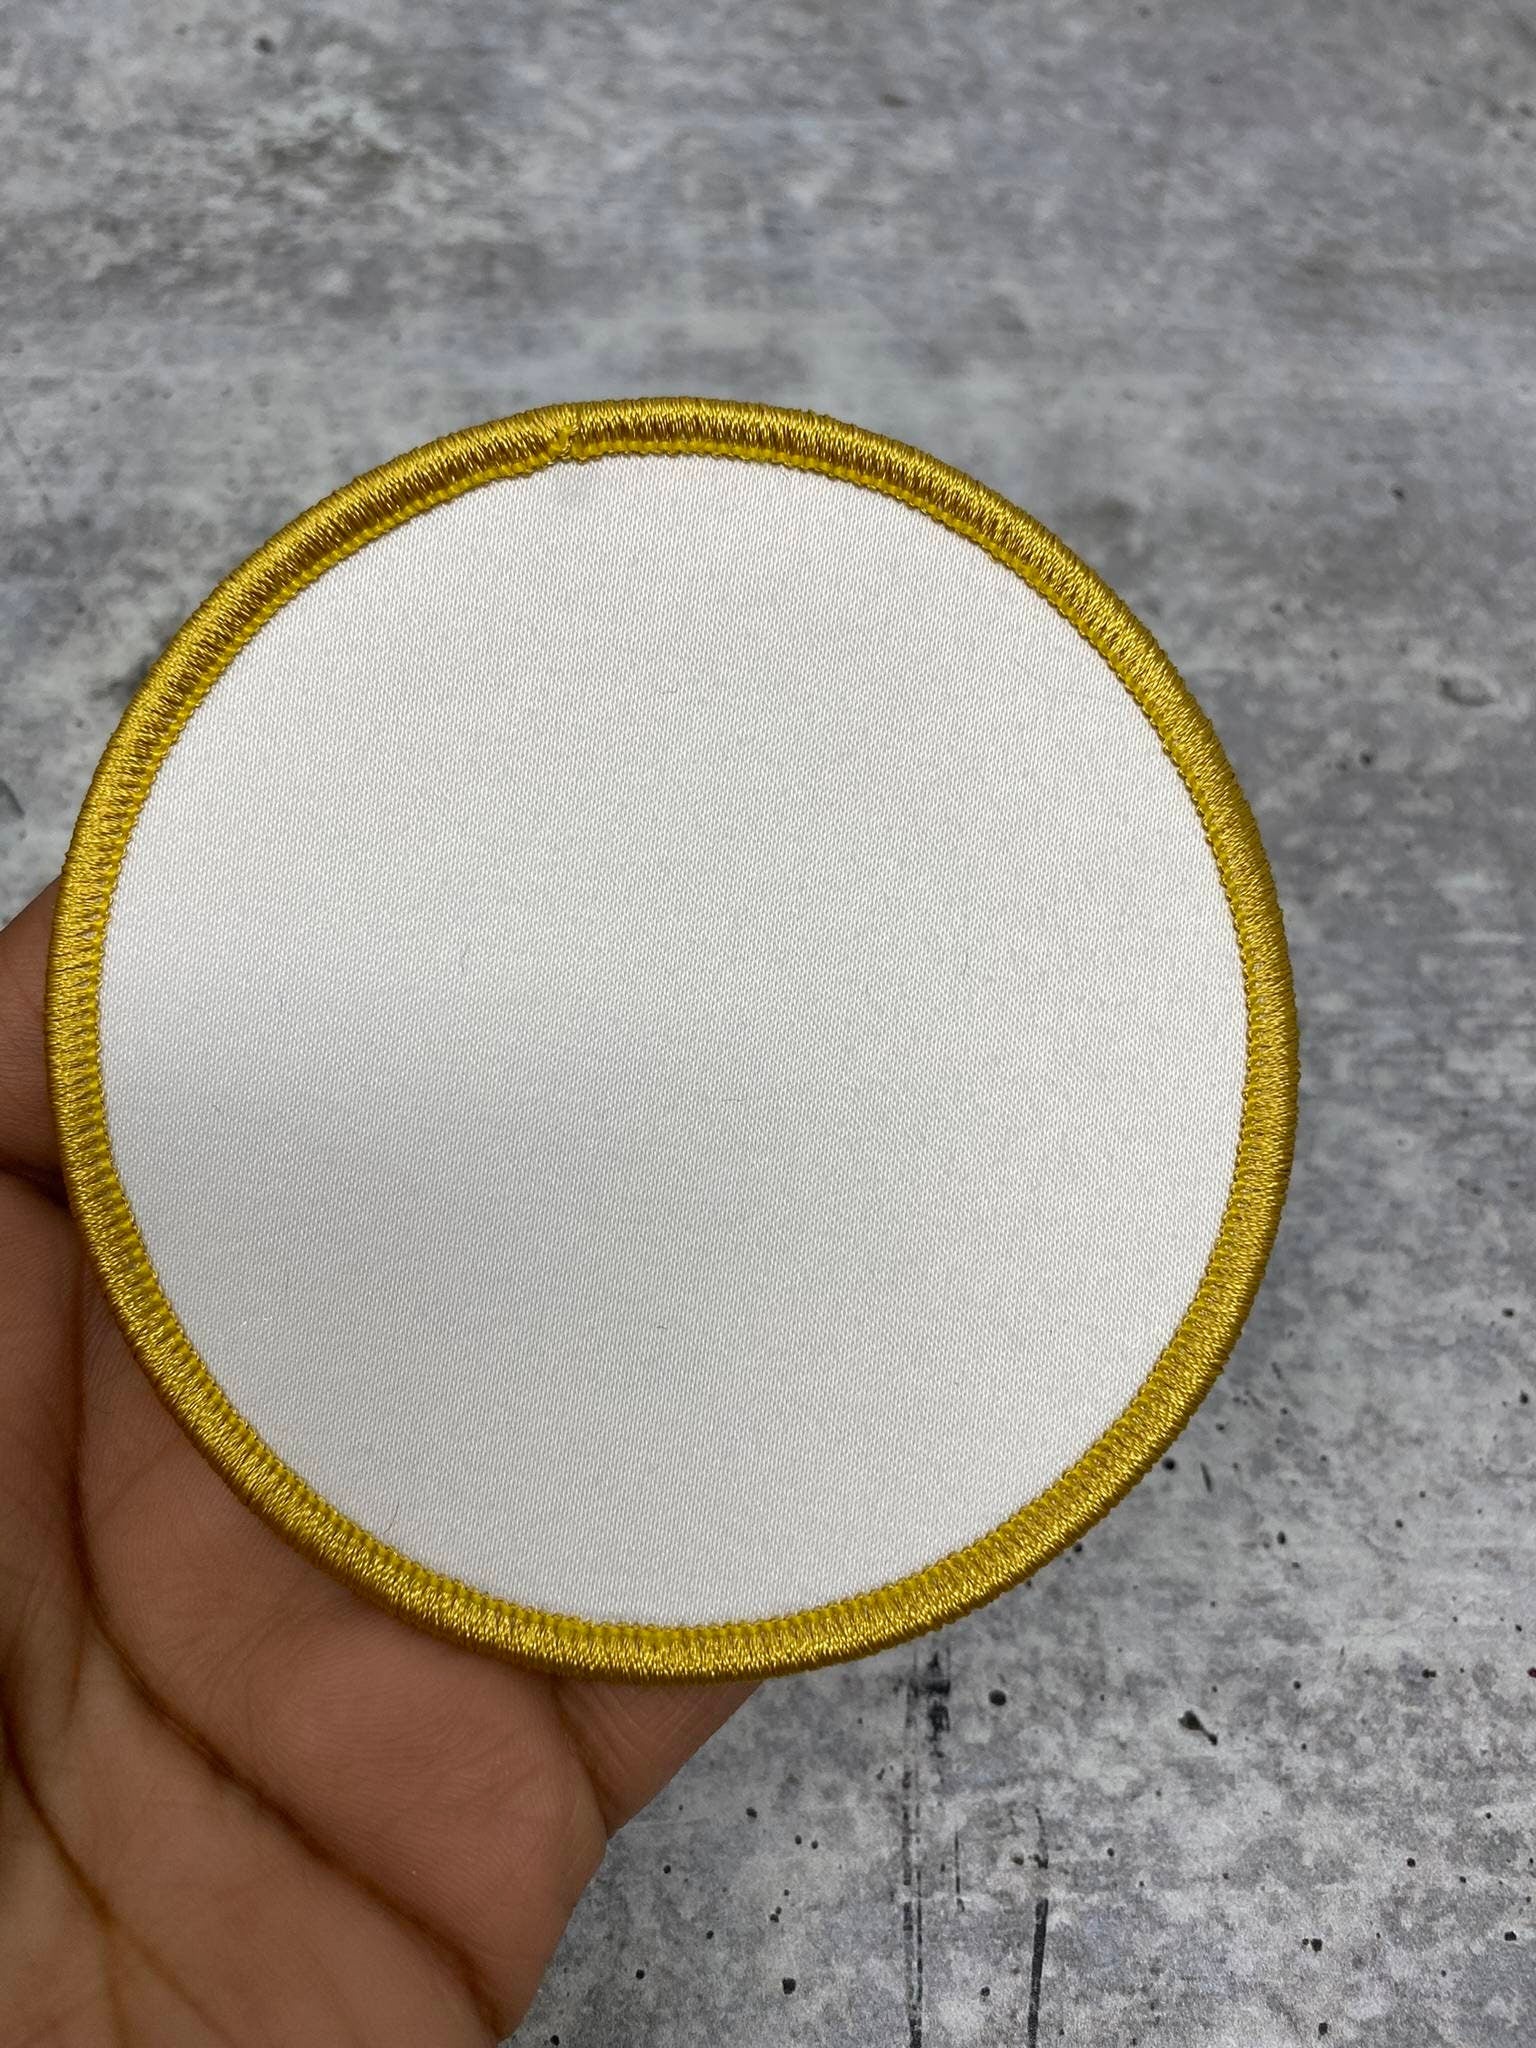 Sublimation Blank Leather Patch -  Sweden